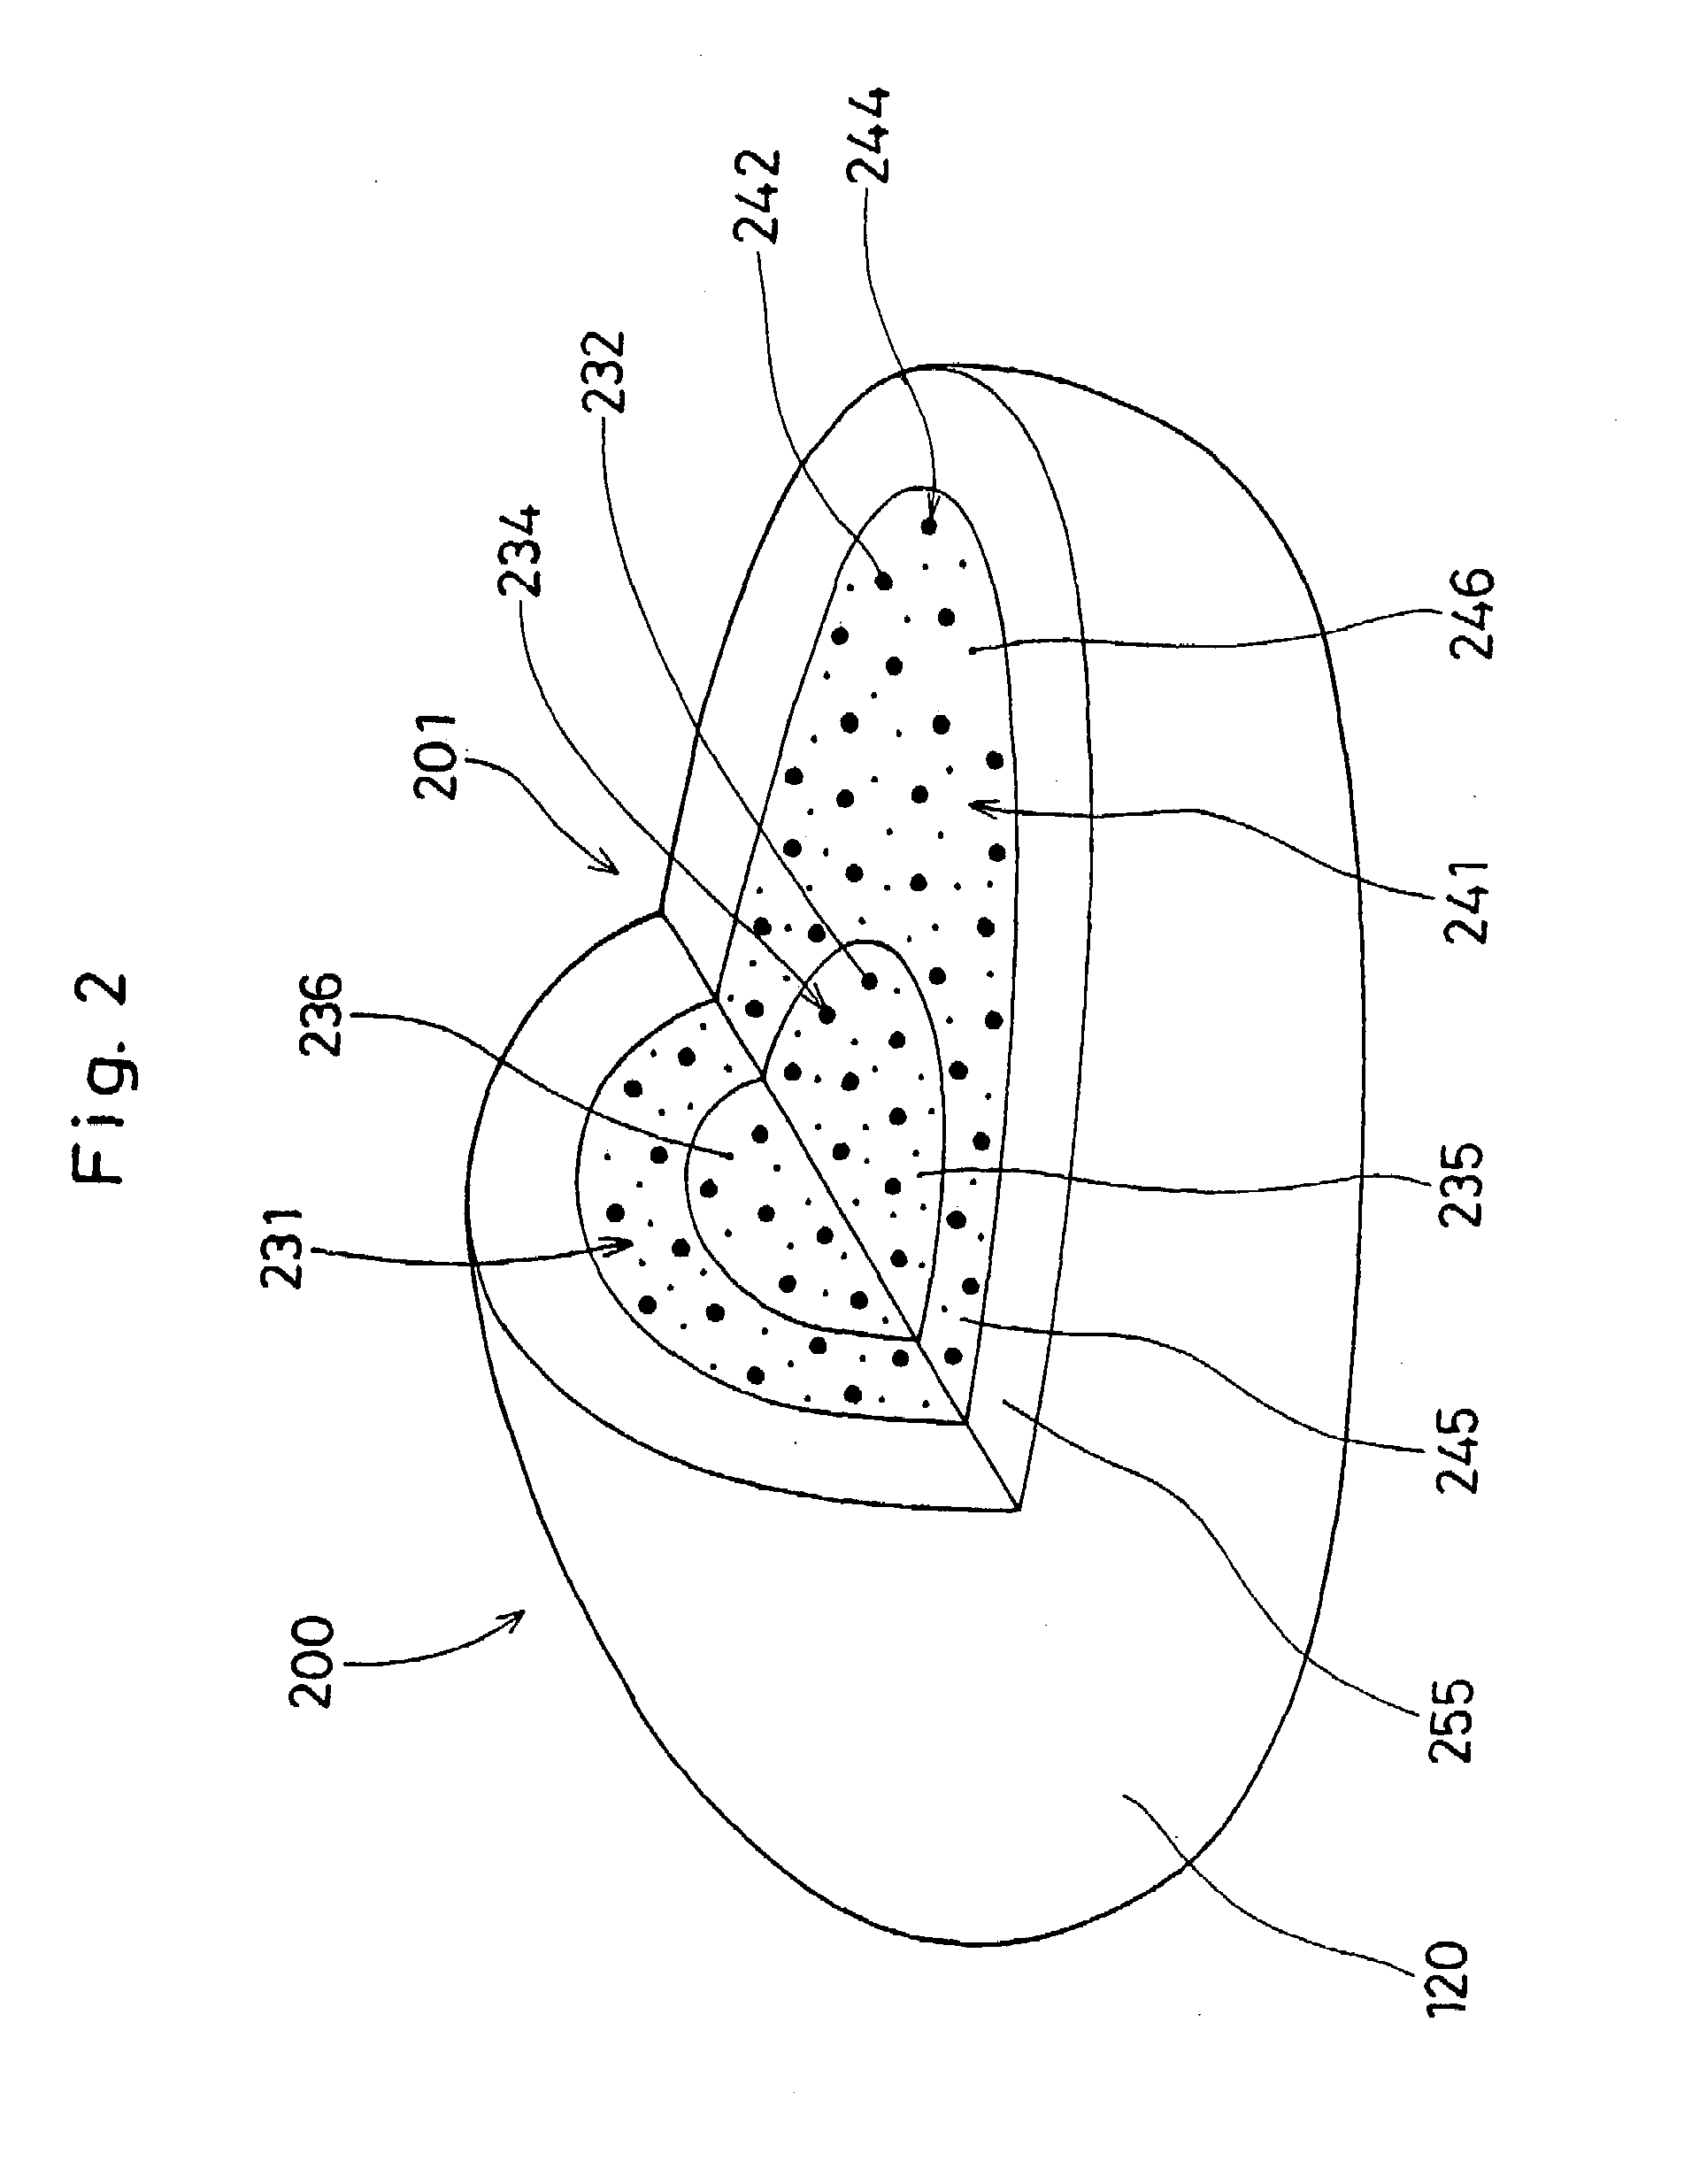 Multi-layer reaction mixtures and apparatuses for delivering a volatile component via a controlled exothermic reaction